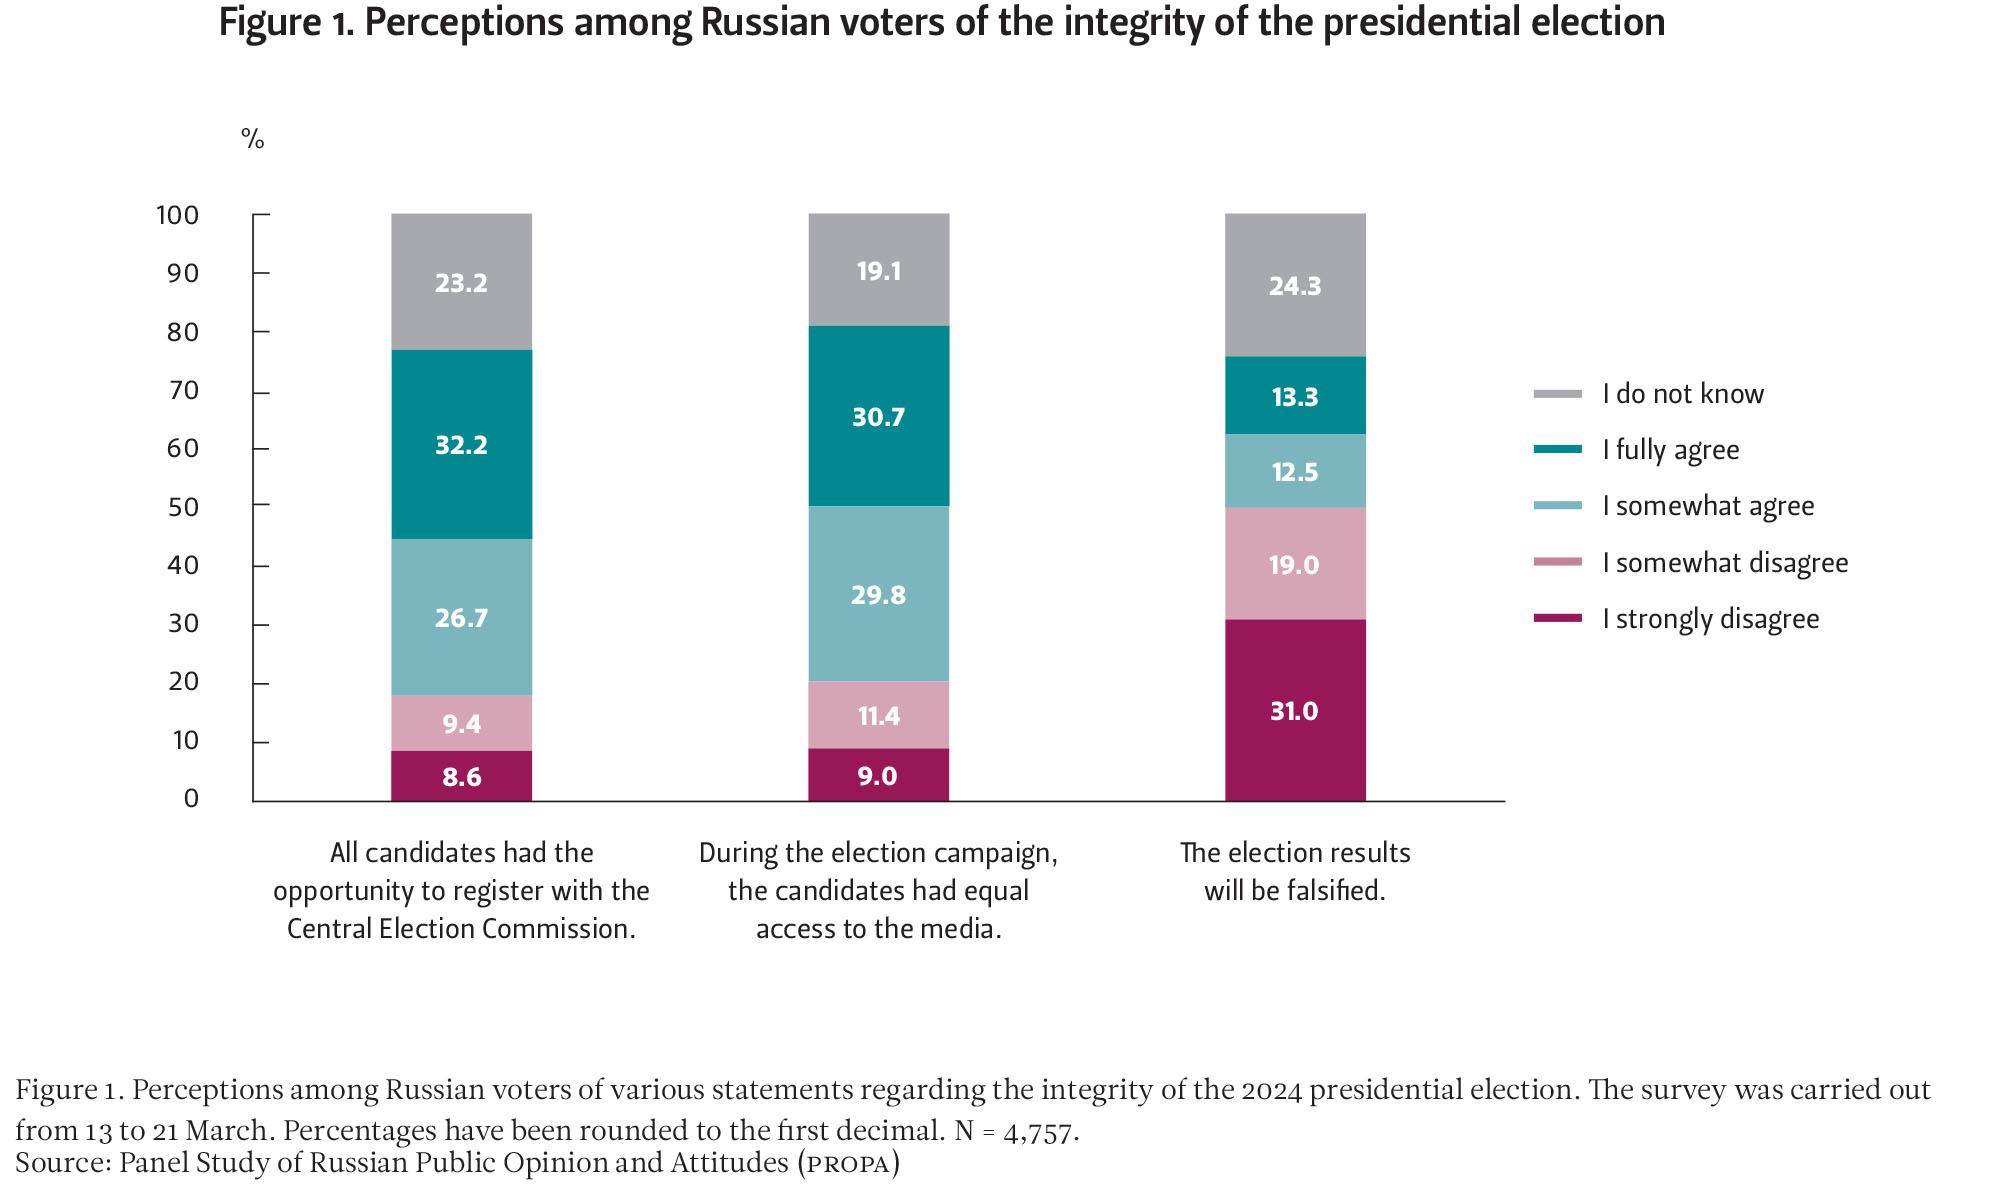 Three pillars depicting perceptions among Russian voters of various statements regarding the integrity of the 2024 presidential election. 